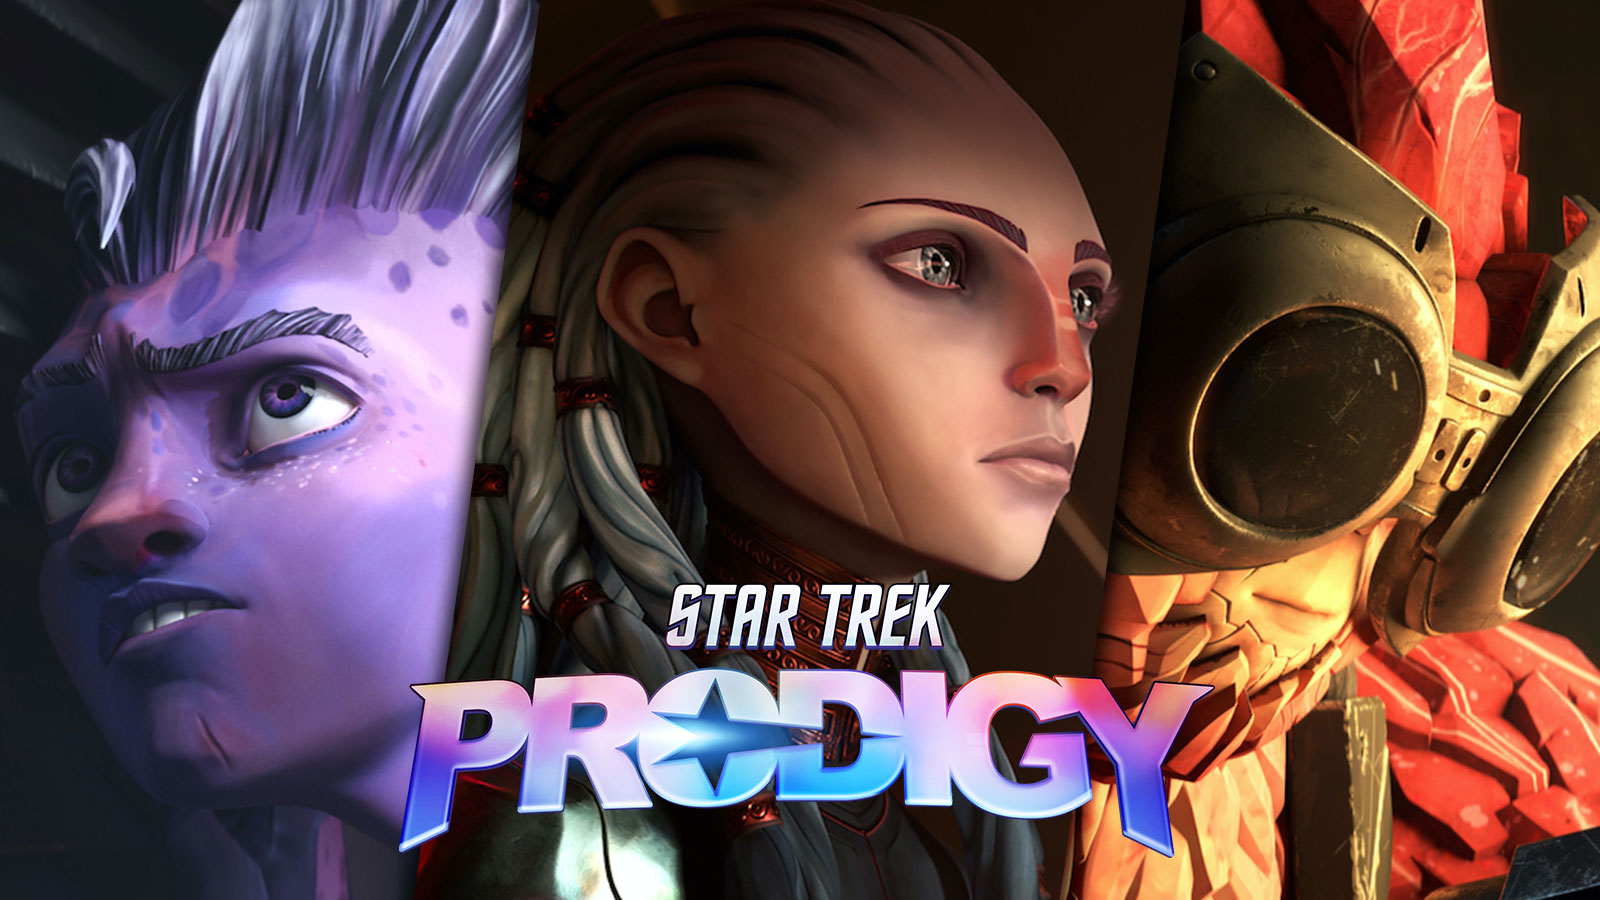 Star Trek: Prodigy Cast And Characters Revealed